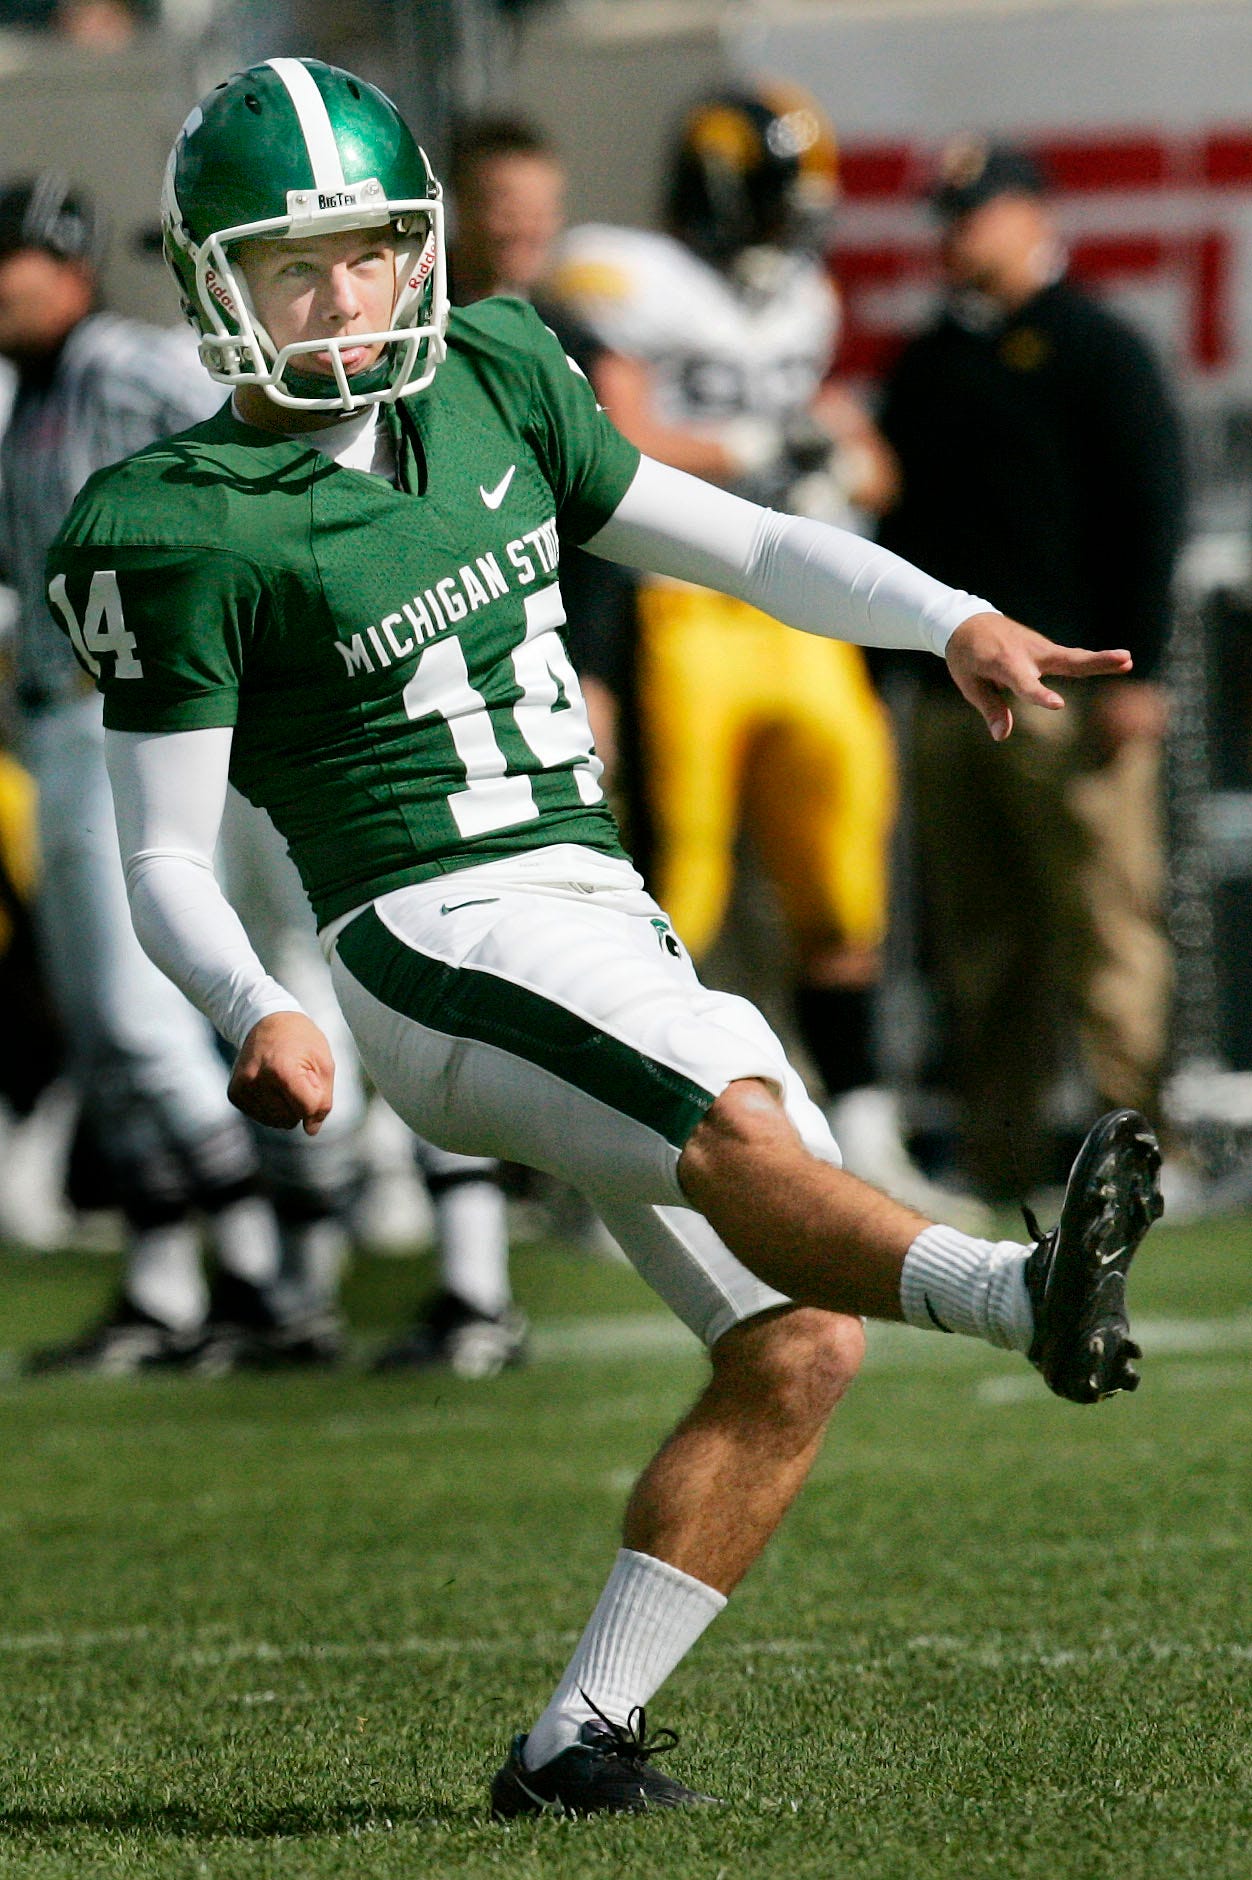 KICKER – Brett Swenson, 2006-09: Swenson finished his career as Michigan State’s program leader in points (377) and field goals (71), and earned first-team All-Big Ten honors as a senior in 2009, nailing 19 field goals. As a junior in 2008, Swenson booted 22 field goals, second-best in MSU history.